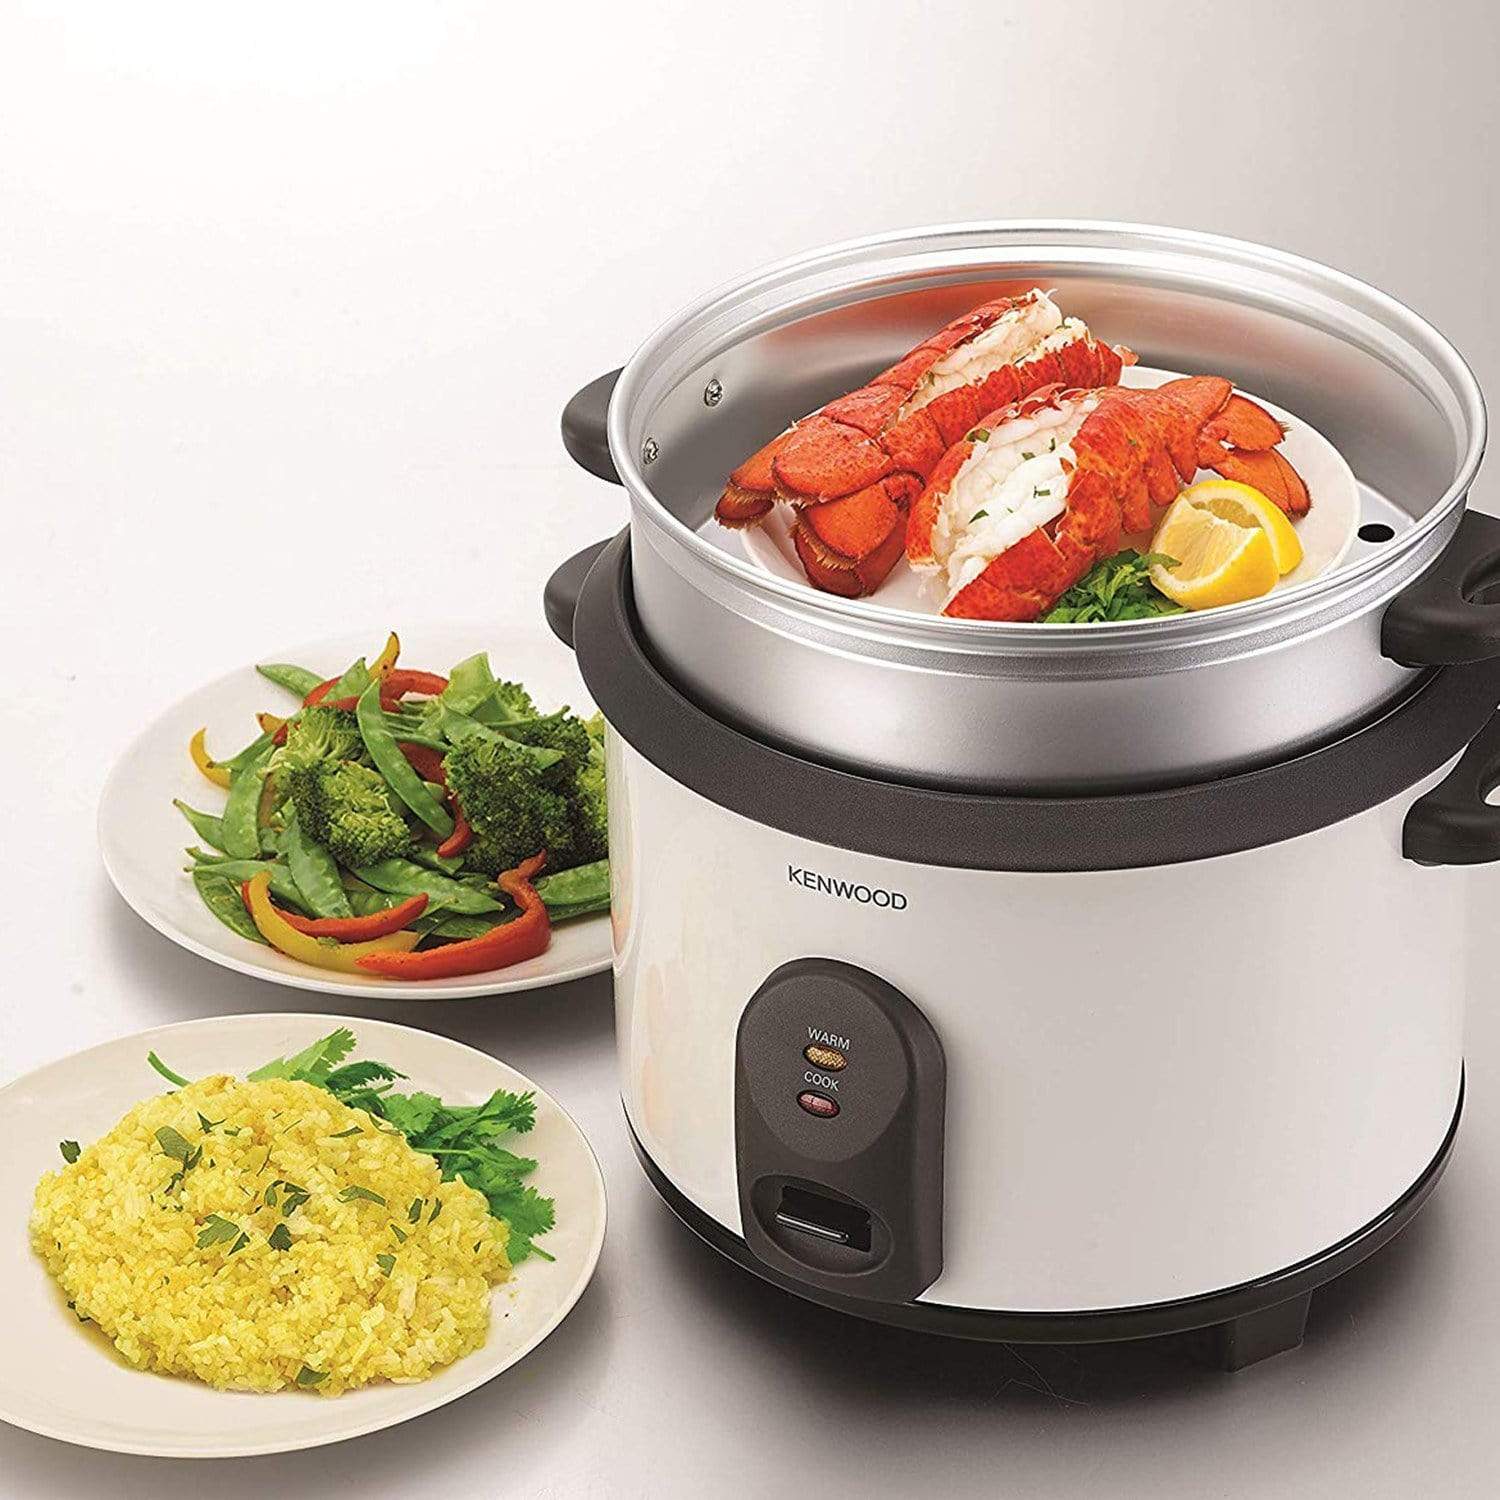 Kenwood 2.8 Litre Rice Cooker with Steam Basket - RCM680 - Jashanmal Home